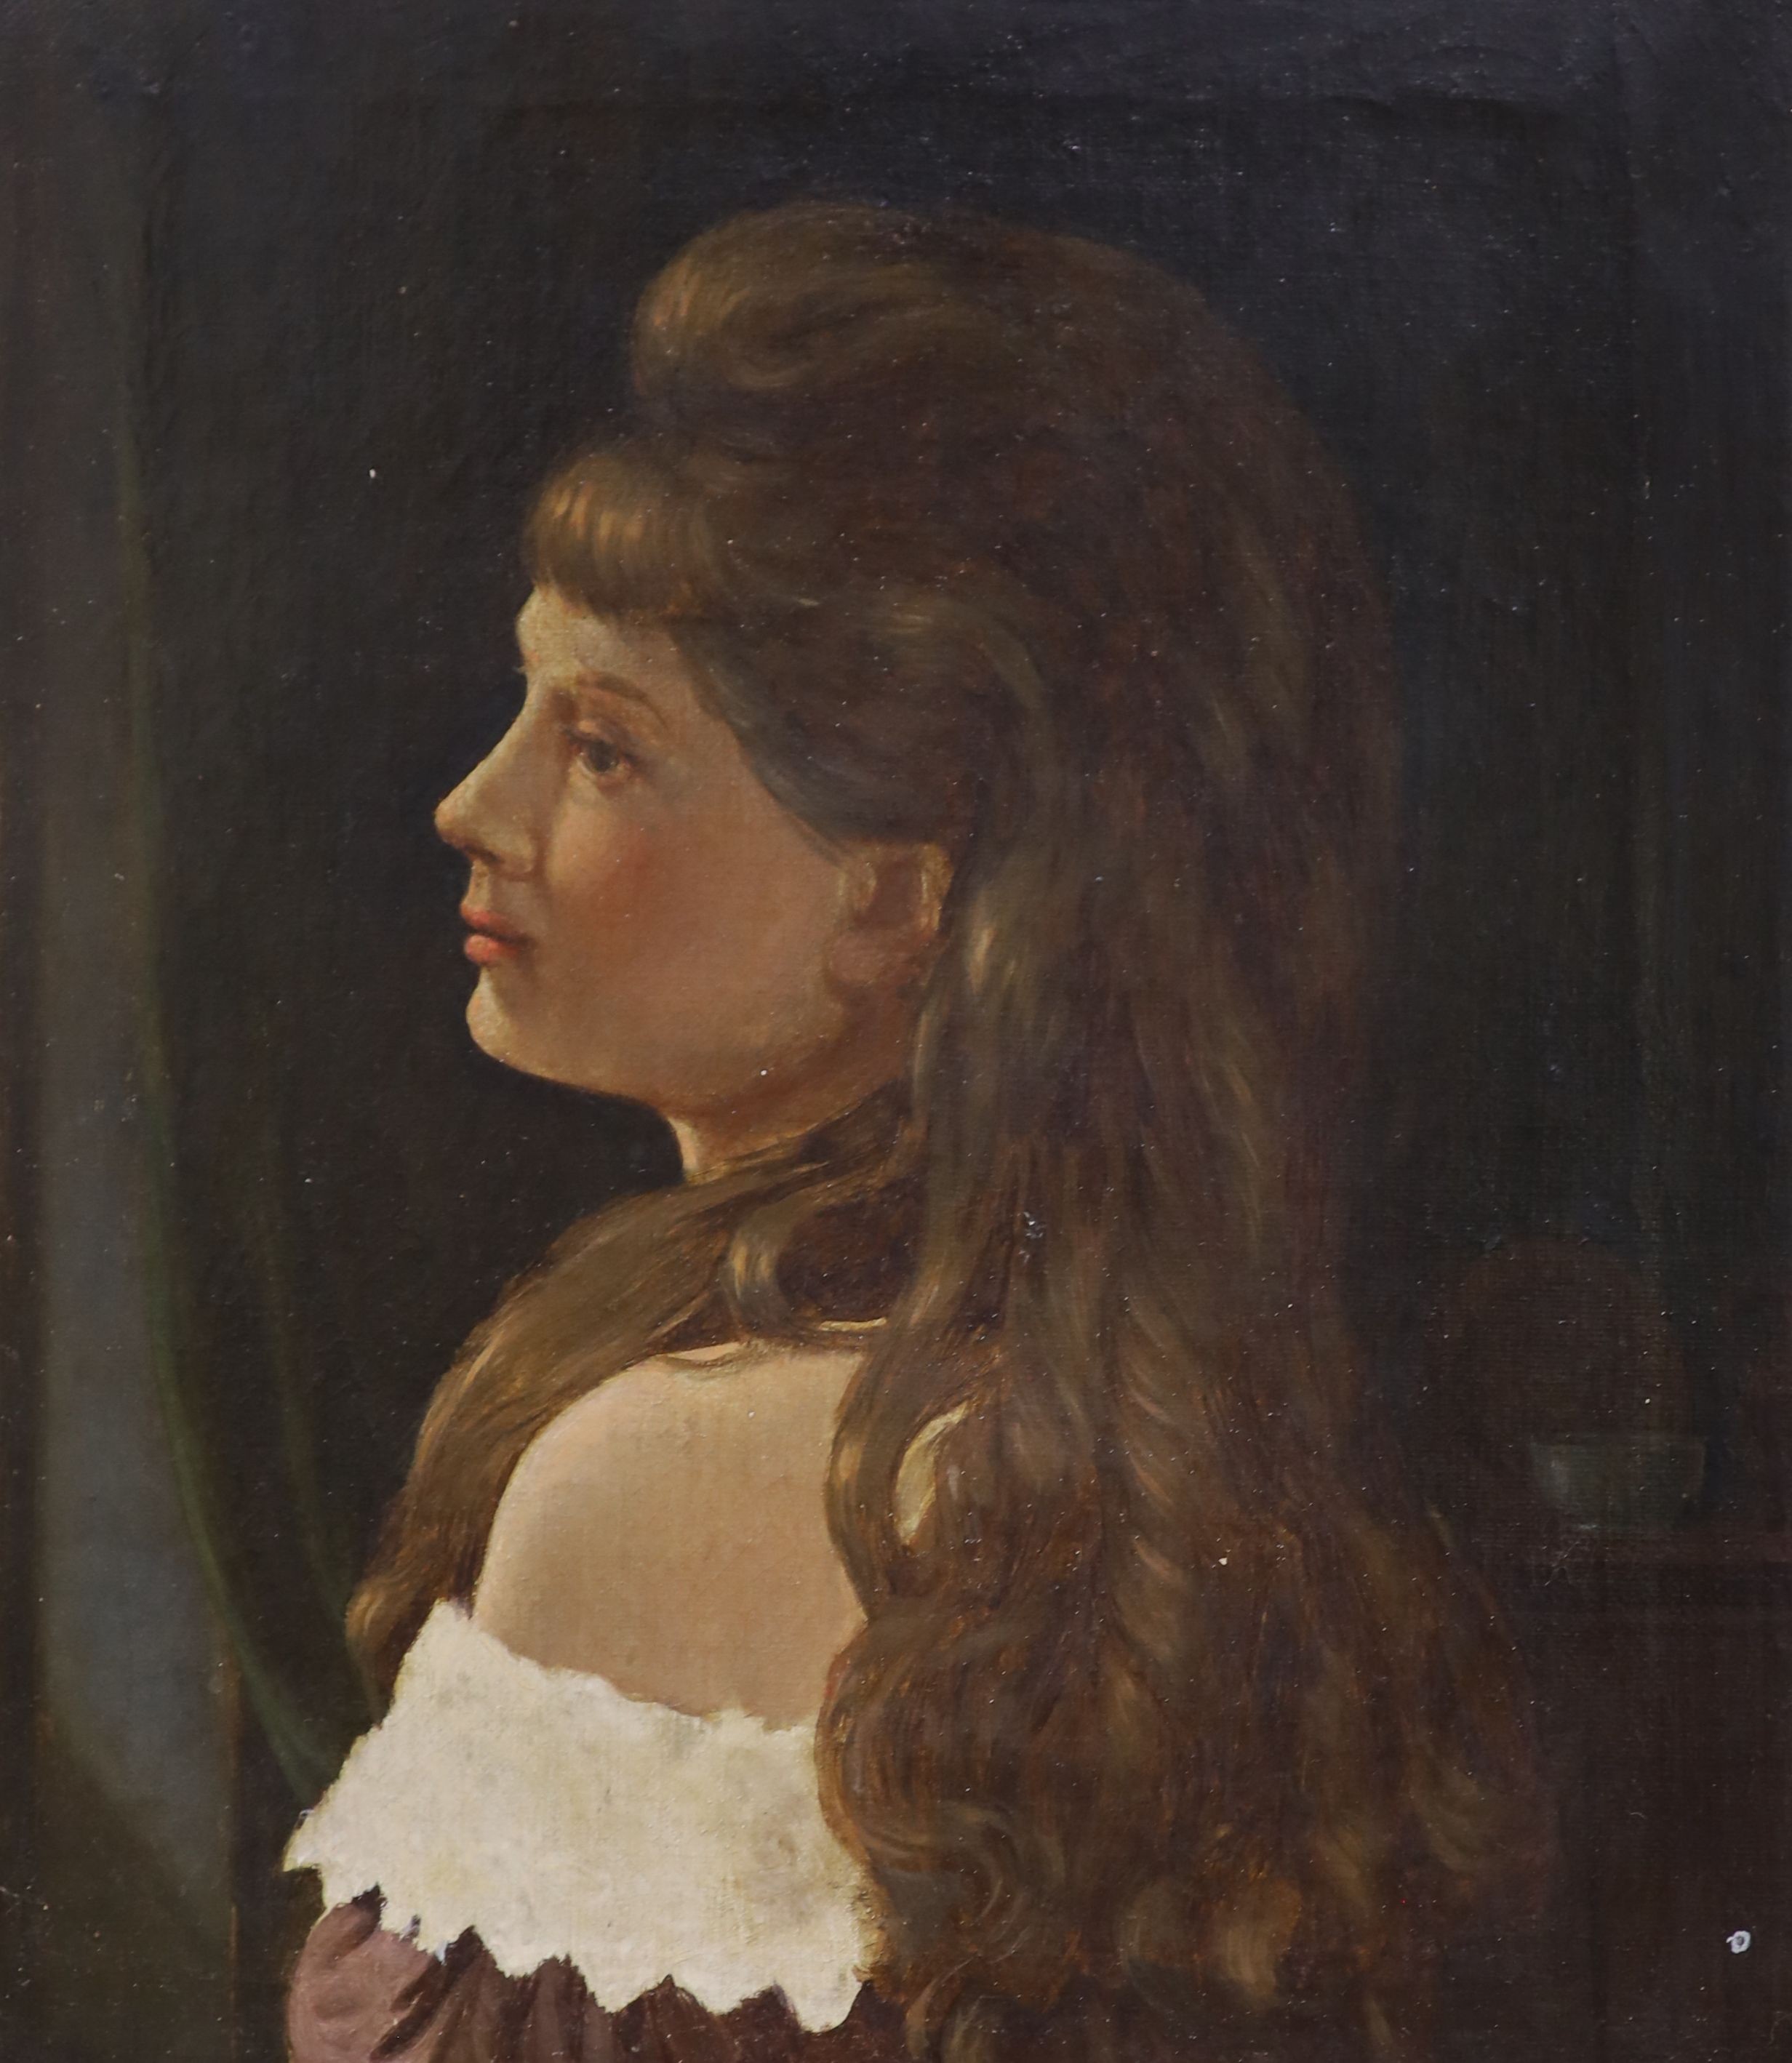 English school circa 1900, oil on canvas, portrait of a young lady, indistinctly signed lower left, 28 x 24 cm.